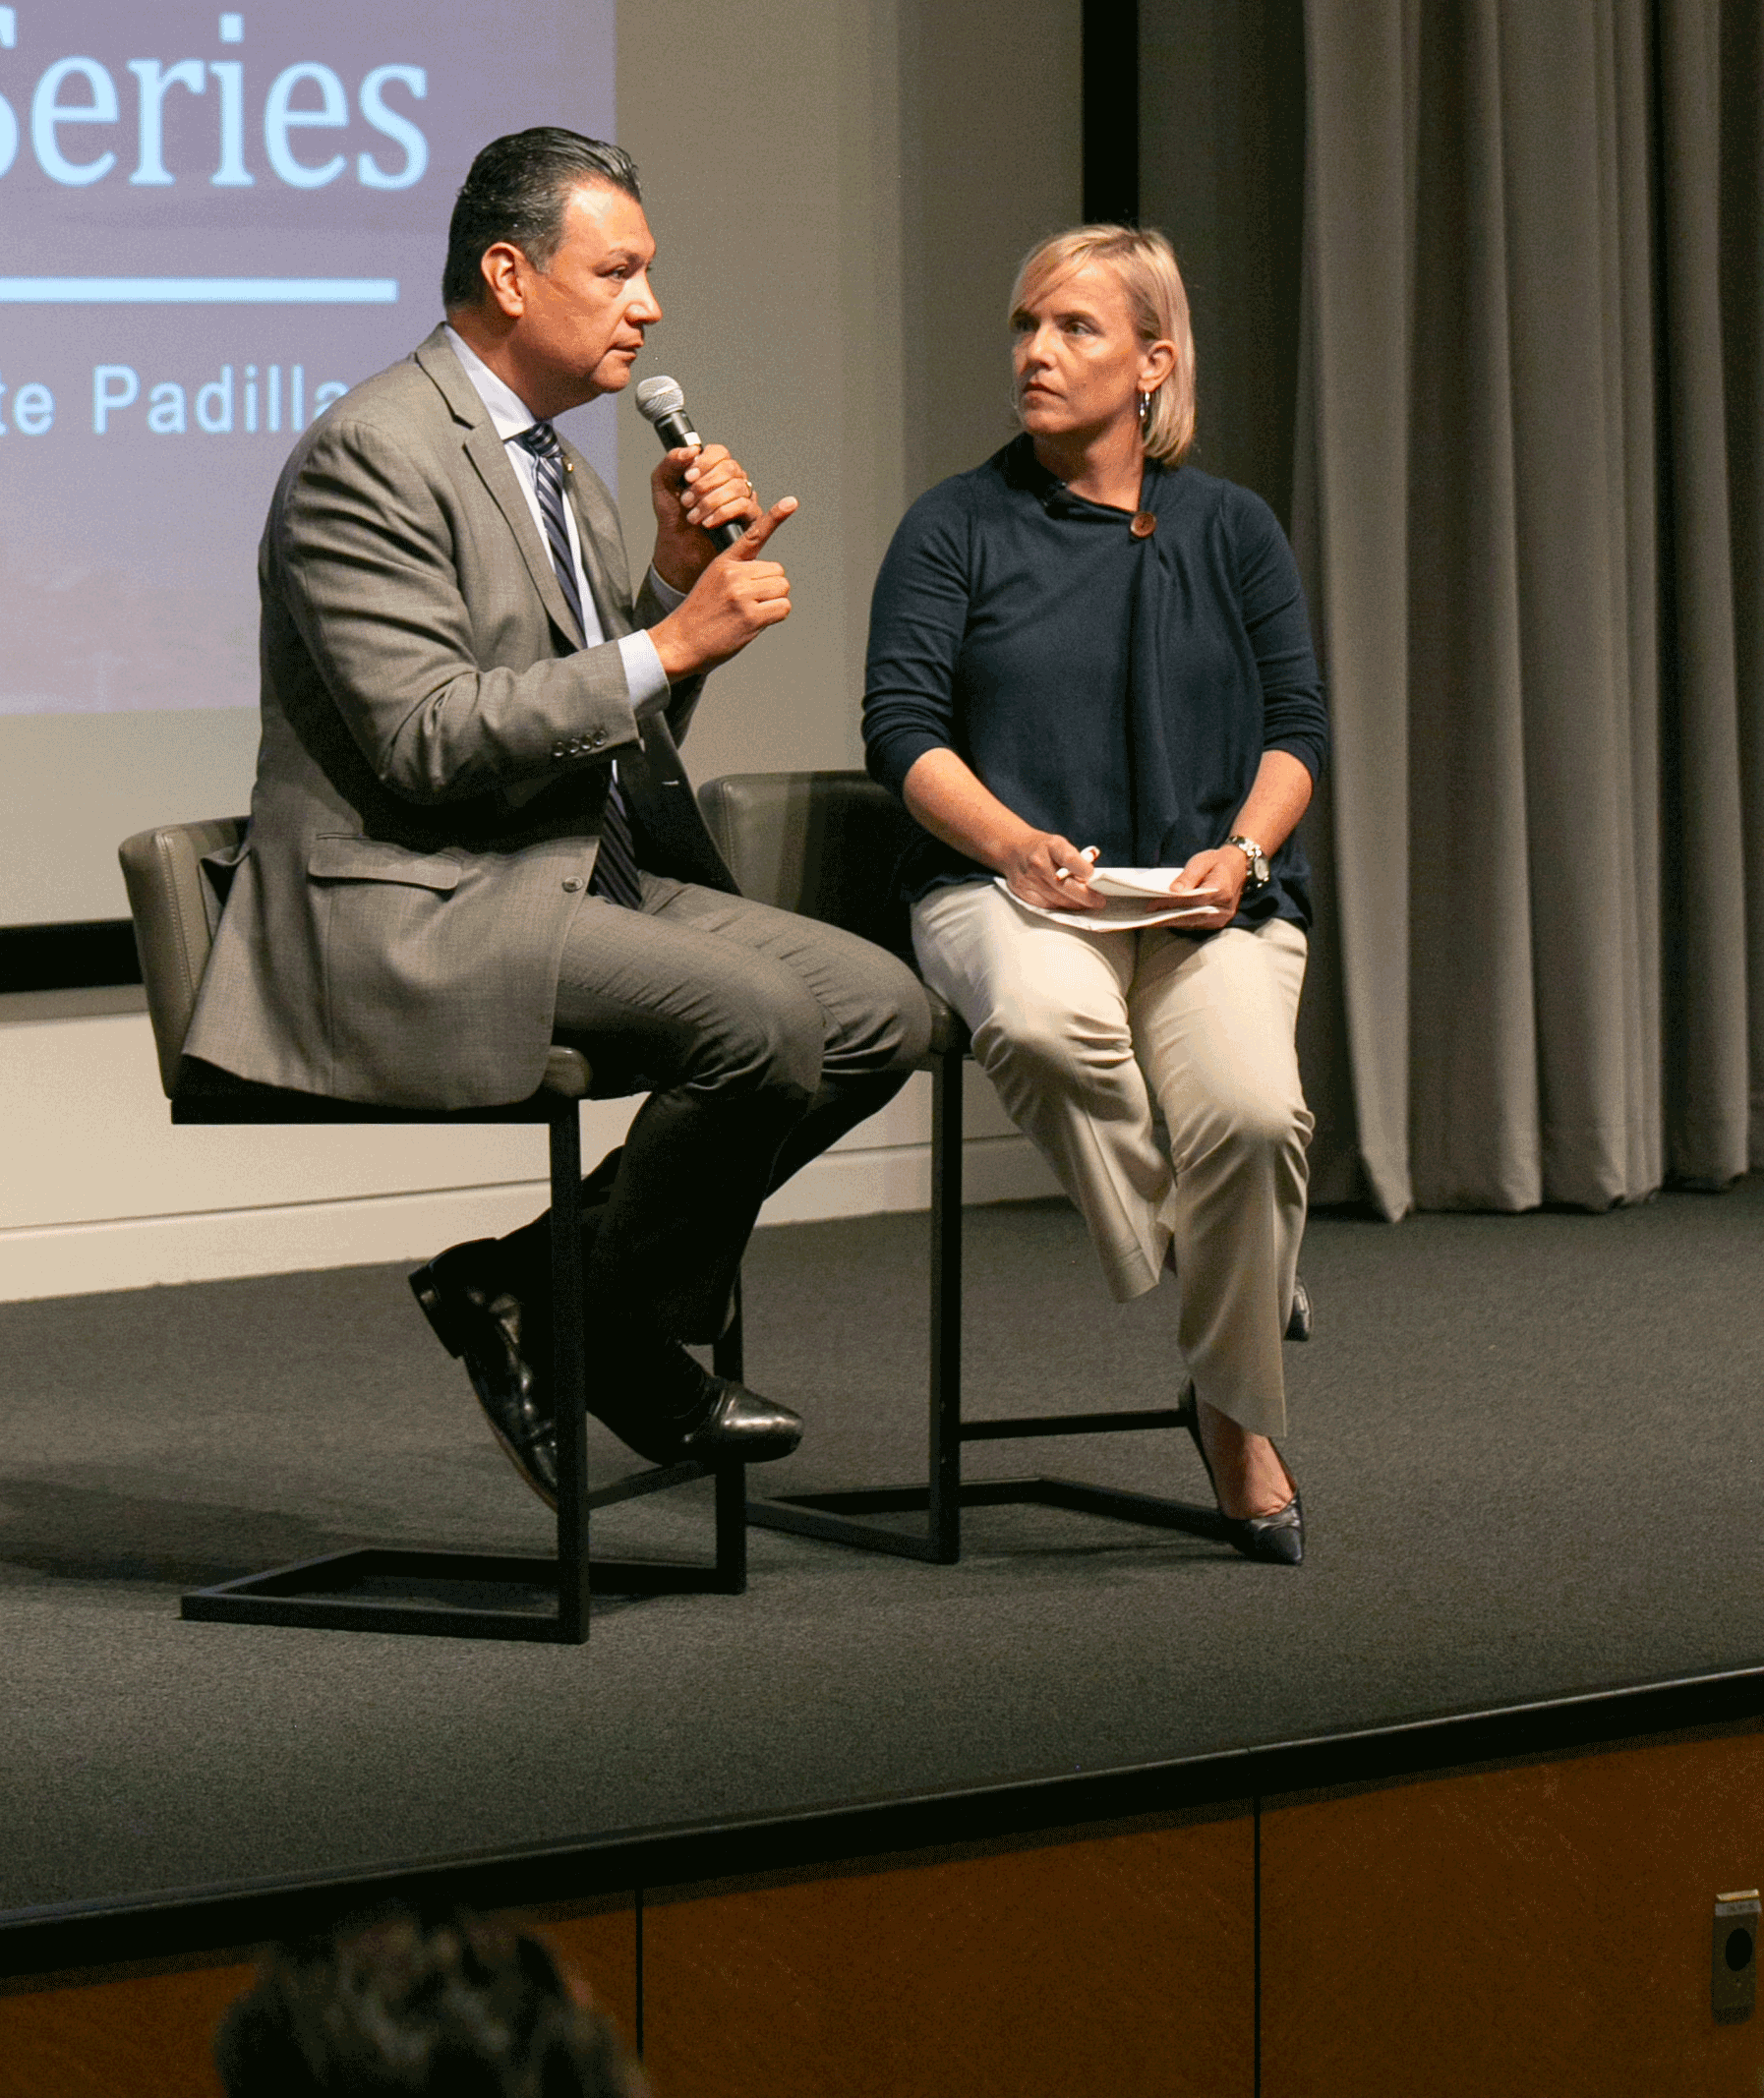 Kristin interviewing California Secretary of State Alex Padilla on ensuring secure elections for all Californians.